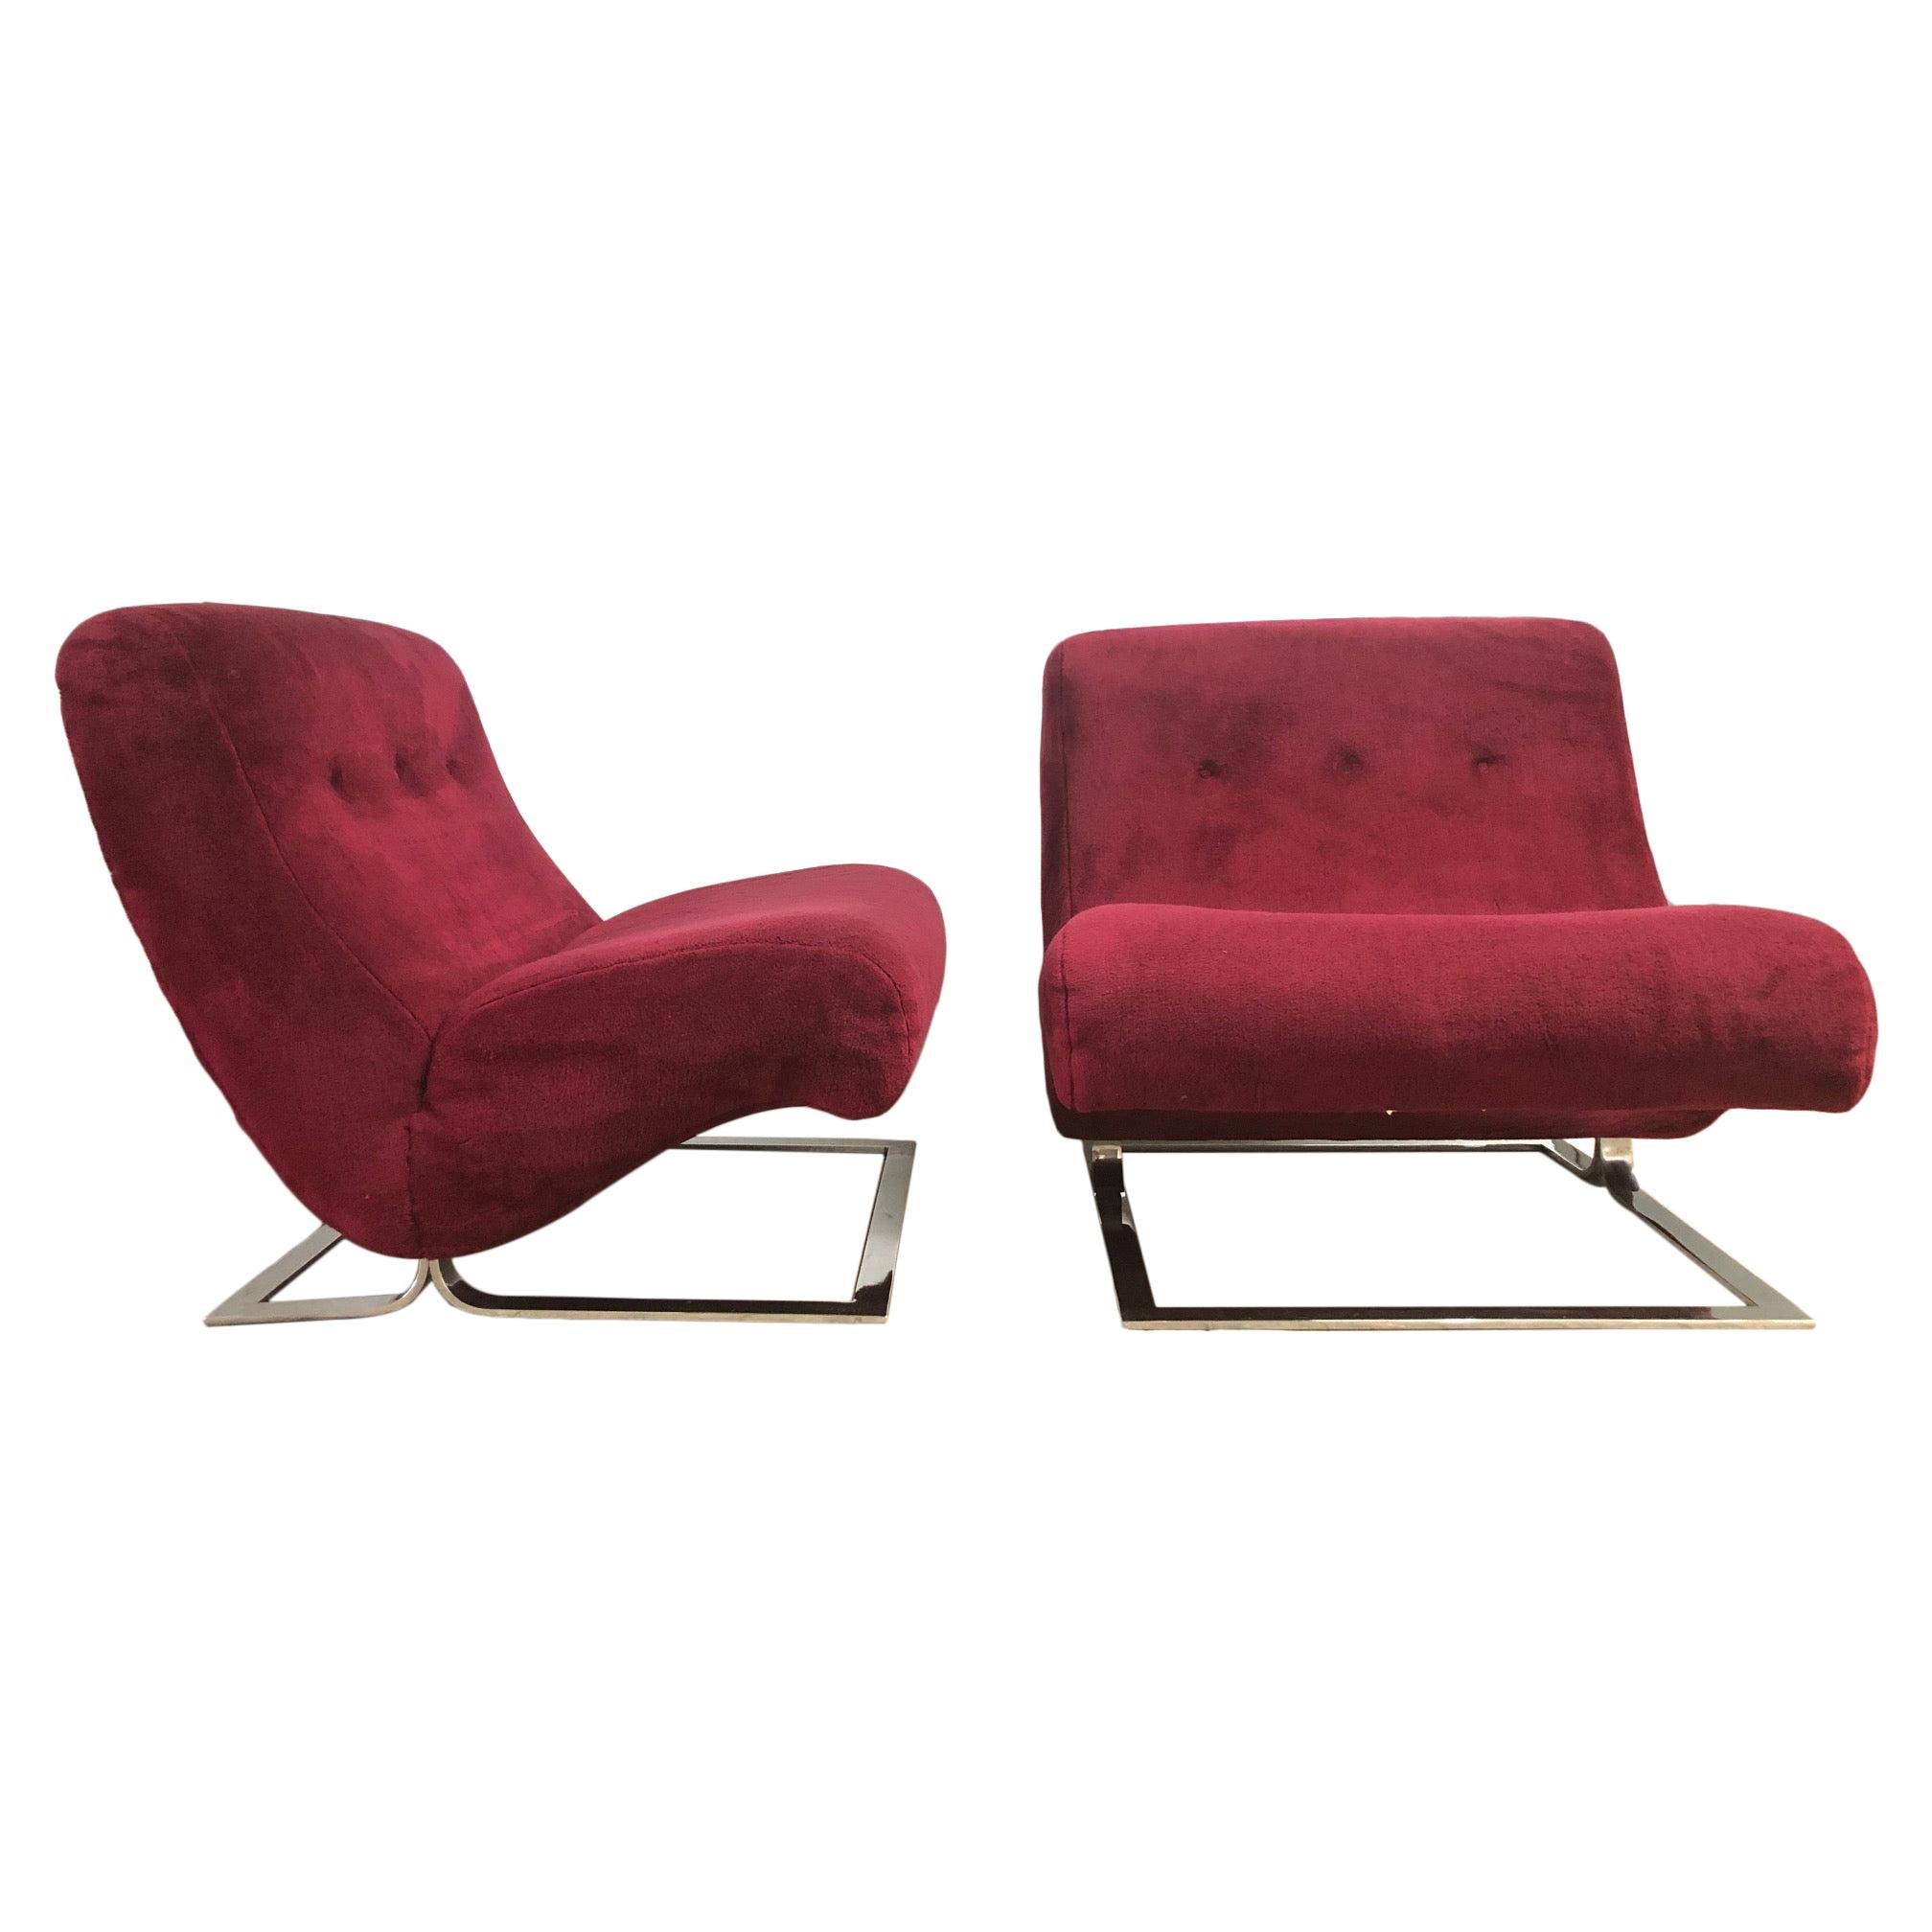 Pair of Chrome Lounge Chairs Style of Milo Baughman